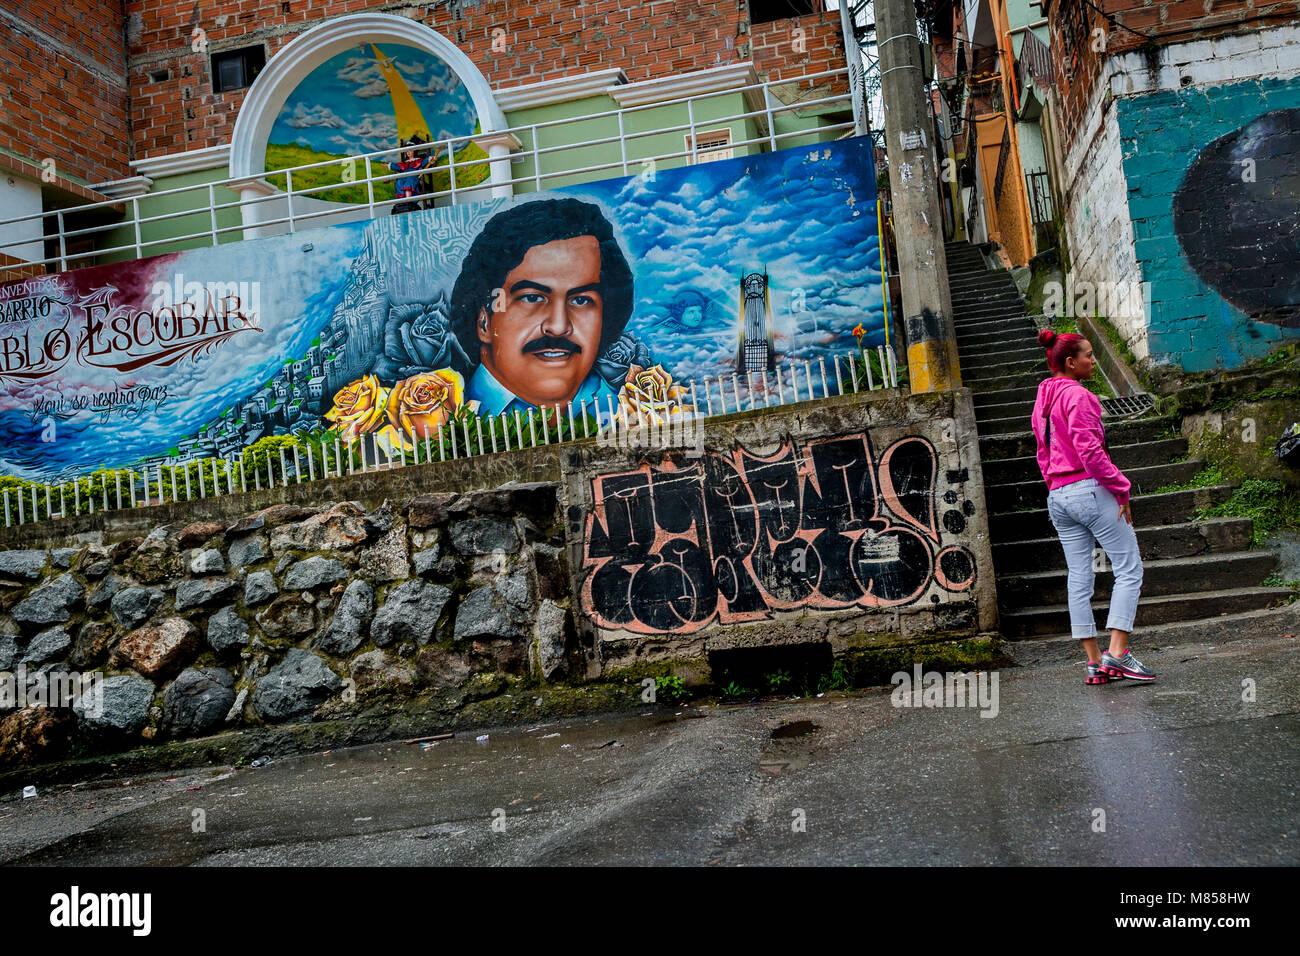 A Colombian woman walks along a large mural artwork depicting the lord Pablo Escobar